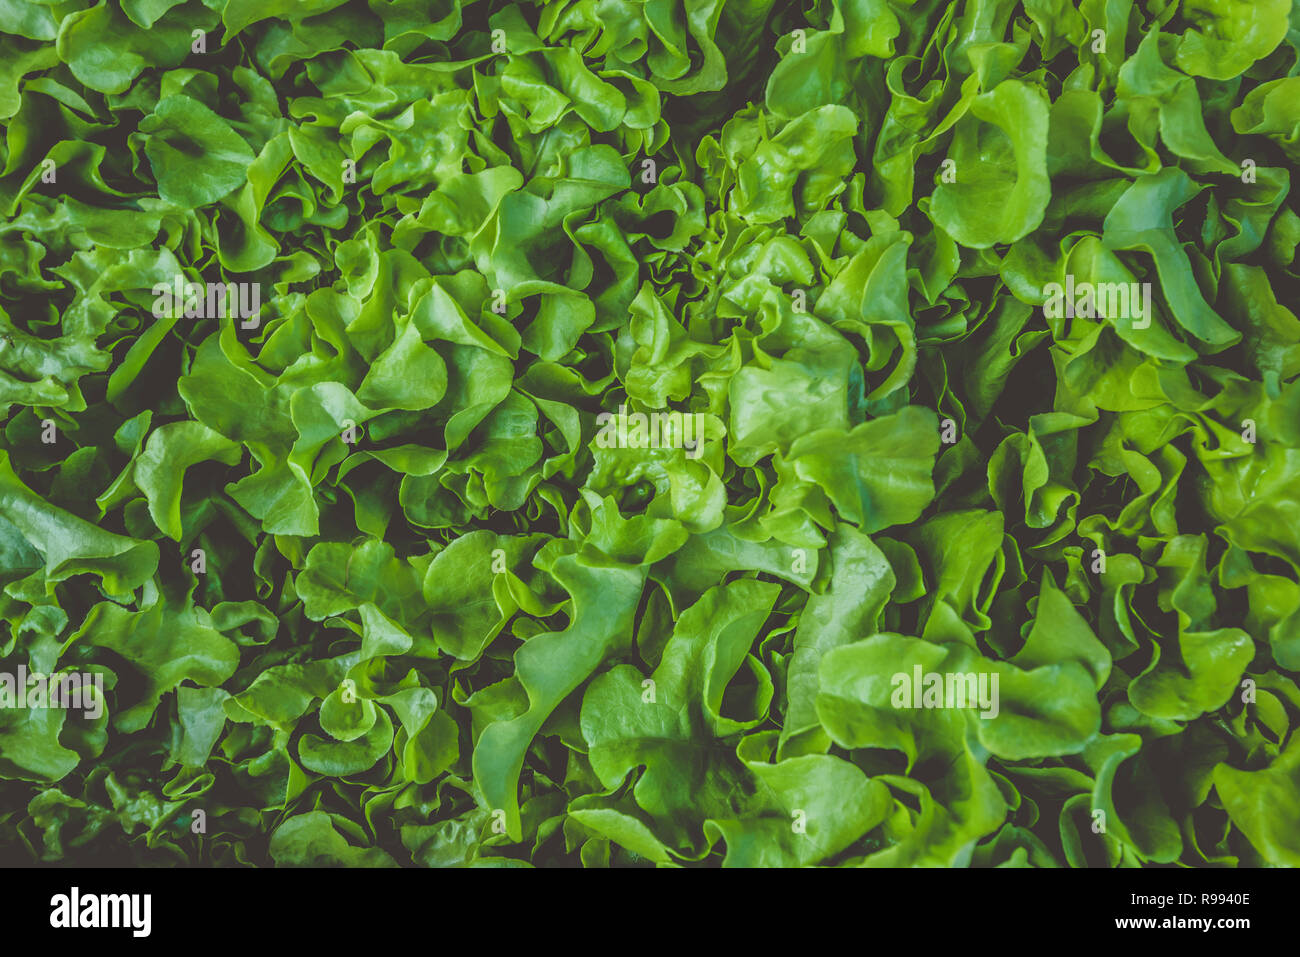 Green hydroponic organic salad vegetable in farm, Thailand. Selective focus Stock Photo